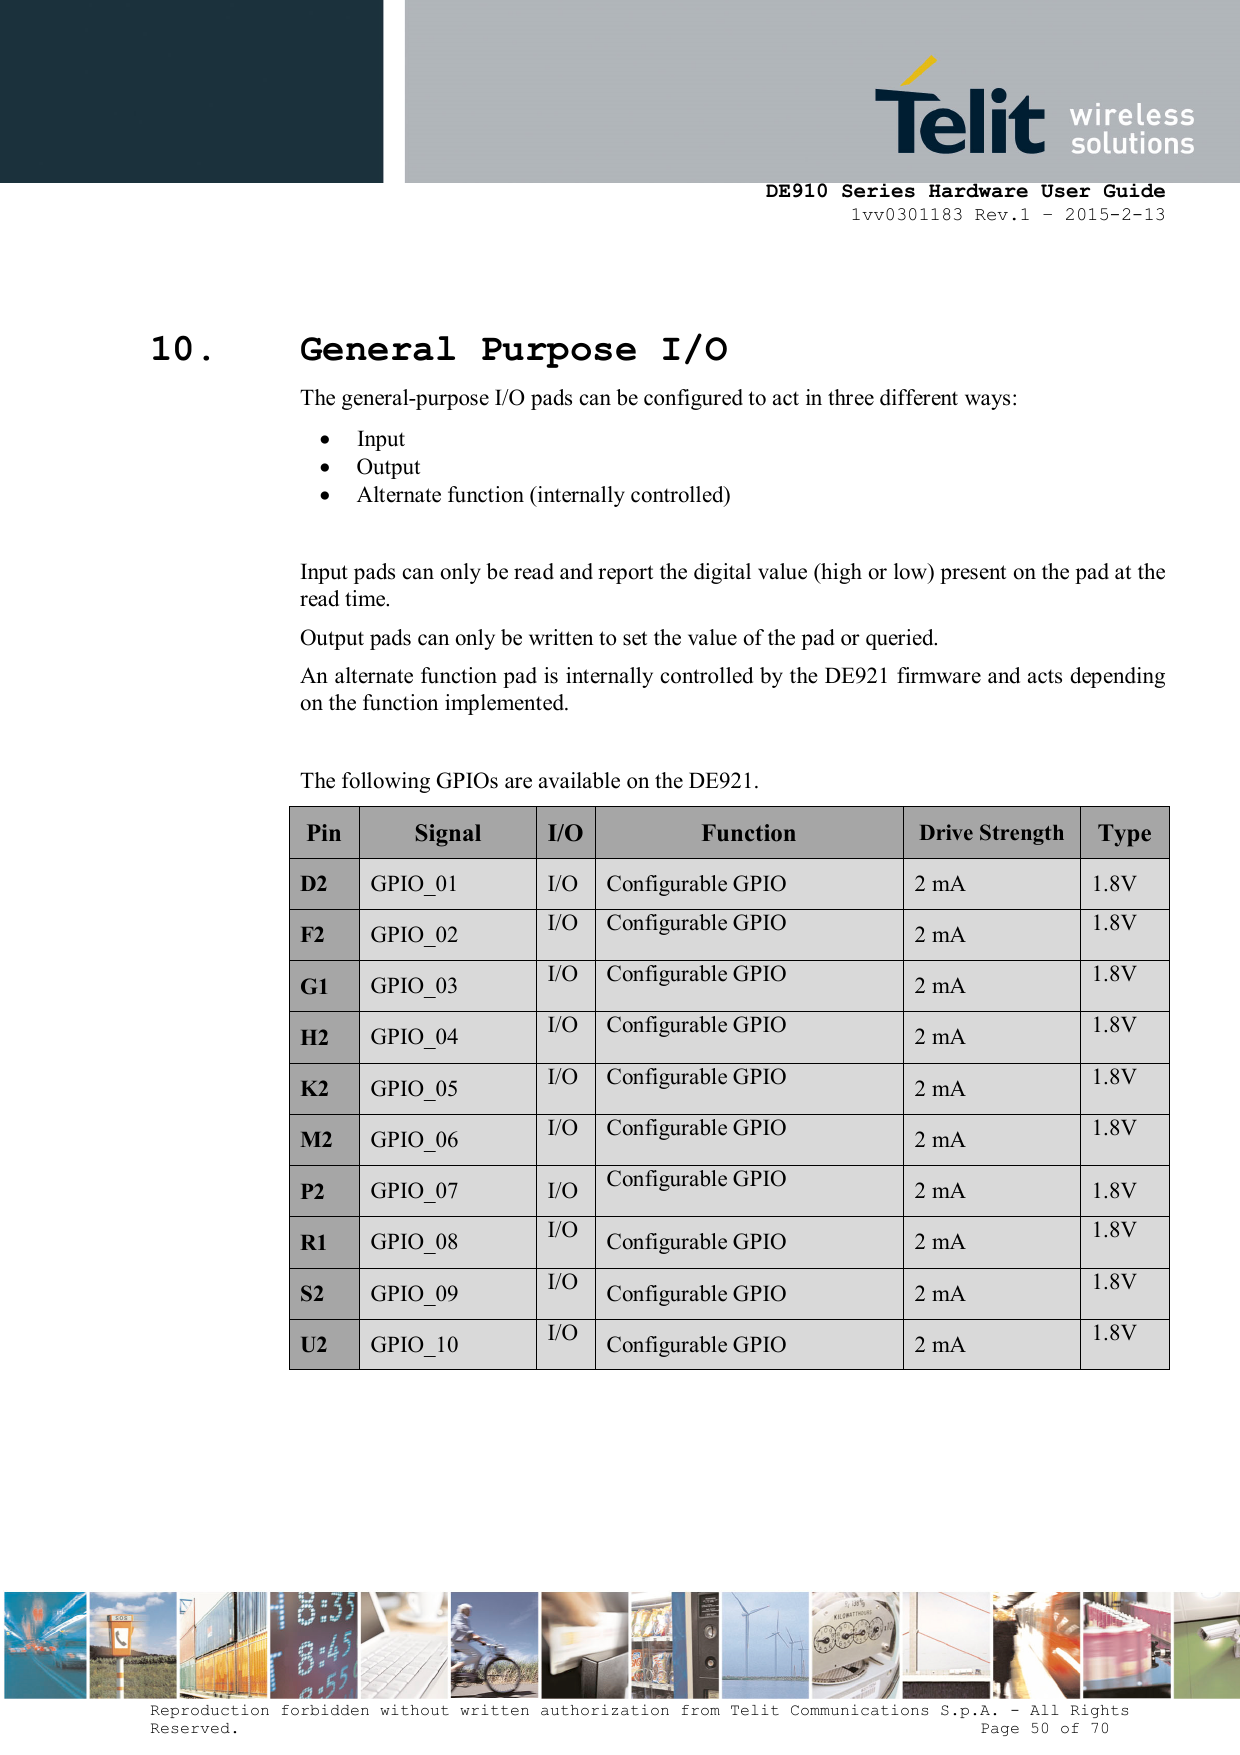      DE910 Series Hardware User Guide 1vv0301183 Rev.1 – 2015-2-13 Reproduction forbidden without written authorization from Telit Communications S.p.A. - All Rights Reserved.                                                                          Page 50 of 70 10. General Purpose I/O The general-purpose I/O pads can be configured to act in three different ways:  Input  Output  Alternate function (internally controlled)  Input pads can only be read and report the digital value (high or low) present on the pad at the read time. Output pads can only be written to set the value of the pad or queried. An alternate function pad is internally controlled by the DE921 firmware and acts depending on the function implemented.  The following GPIOs are available on the DE921. Pin Signal  I/O Function  Drive Strength Type D2  GPIO_01  I/O Configurable GPIO  2 mA  1.8V F2  GPIO_02 I/O Configurable GPIO 2 mA 1.8V G1  GPIO_03 I/O Configurable GPIO 2 mA 1.8V H2  GPIO_04 I/O Configurable GPIO 2 mA 1.8V K2  GPIO_05 I/O Configurable GPIO 2 mA 1.8V M2  GPIO_06 I/O Configurable GPIO 2 mA 1.8V P2  GPIO_07  I/O Configurable GPIO 2 mA  1.8V R1  GPIO_08 I/O Configurable GPIO  2 mA 1.8V S2  GPIO_09 I/O Configurable GPIO  2 mA 1.8V U2  GPIO_10 I/O Configurable GPIO  2 mA 1.8V        